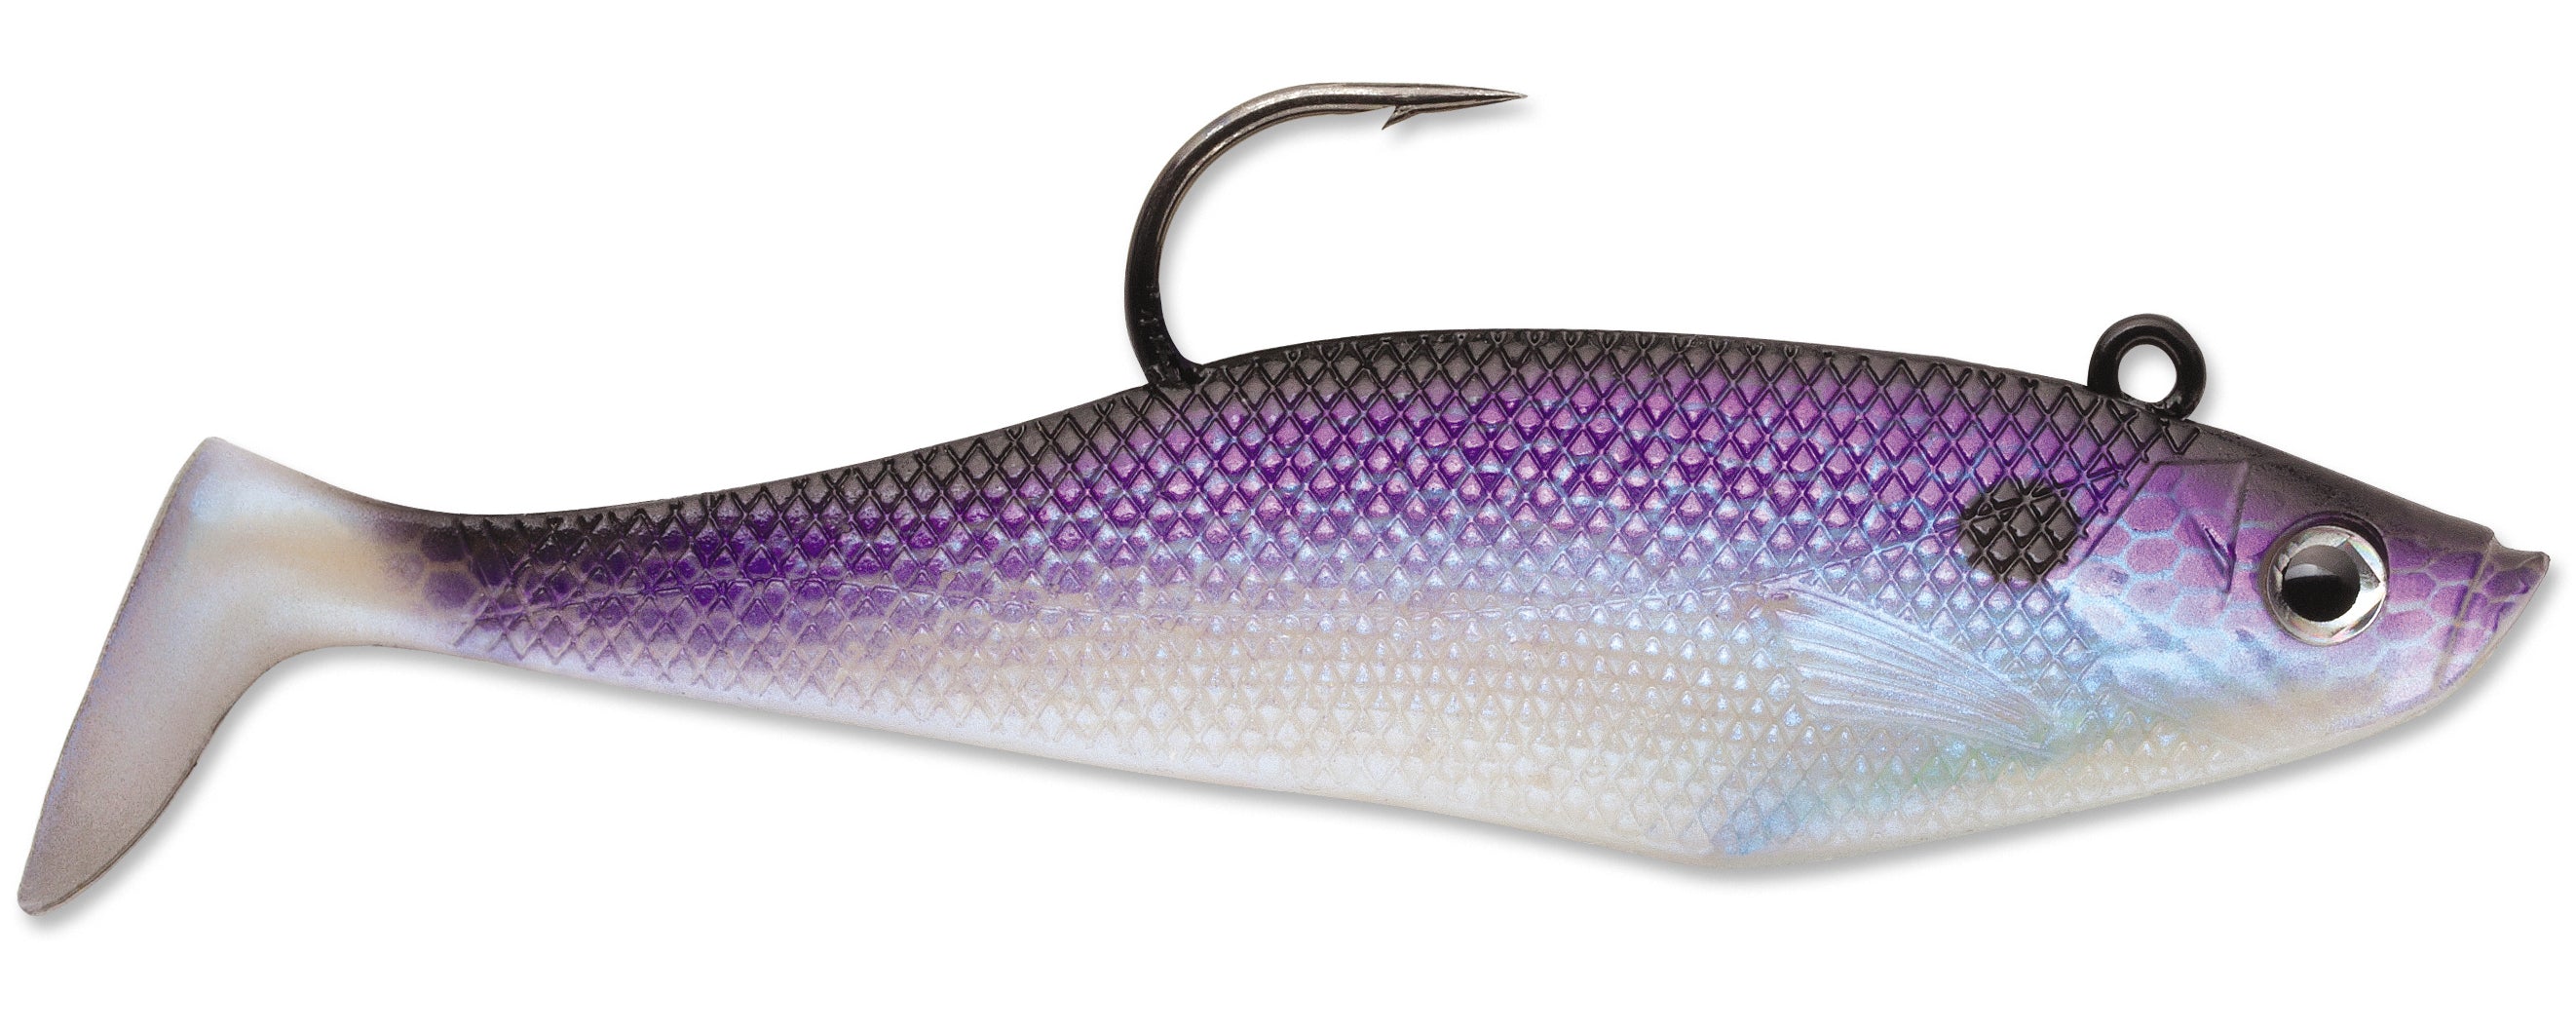  Down South Lures 5 Super Model Paddle Tail Swimbaits -  6-Pack, Victorious Secret (Made in USA) : Sports & Outdoors